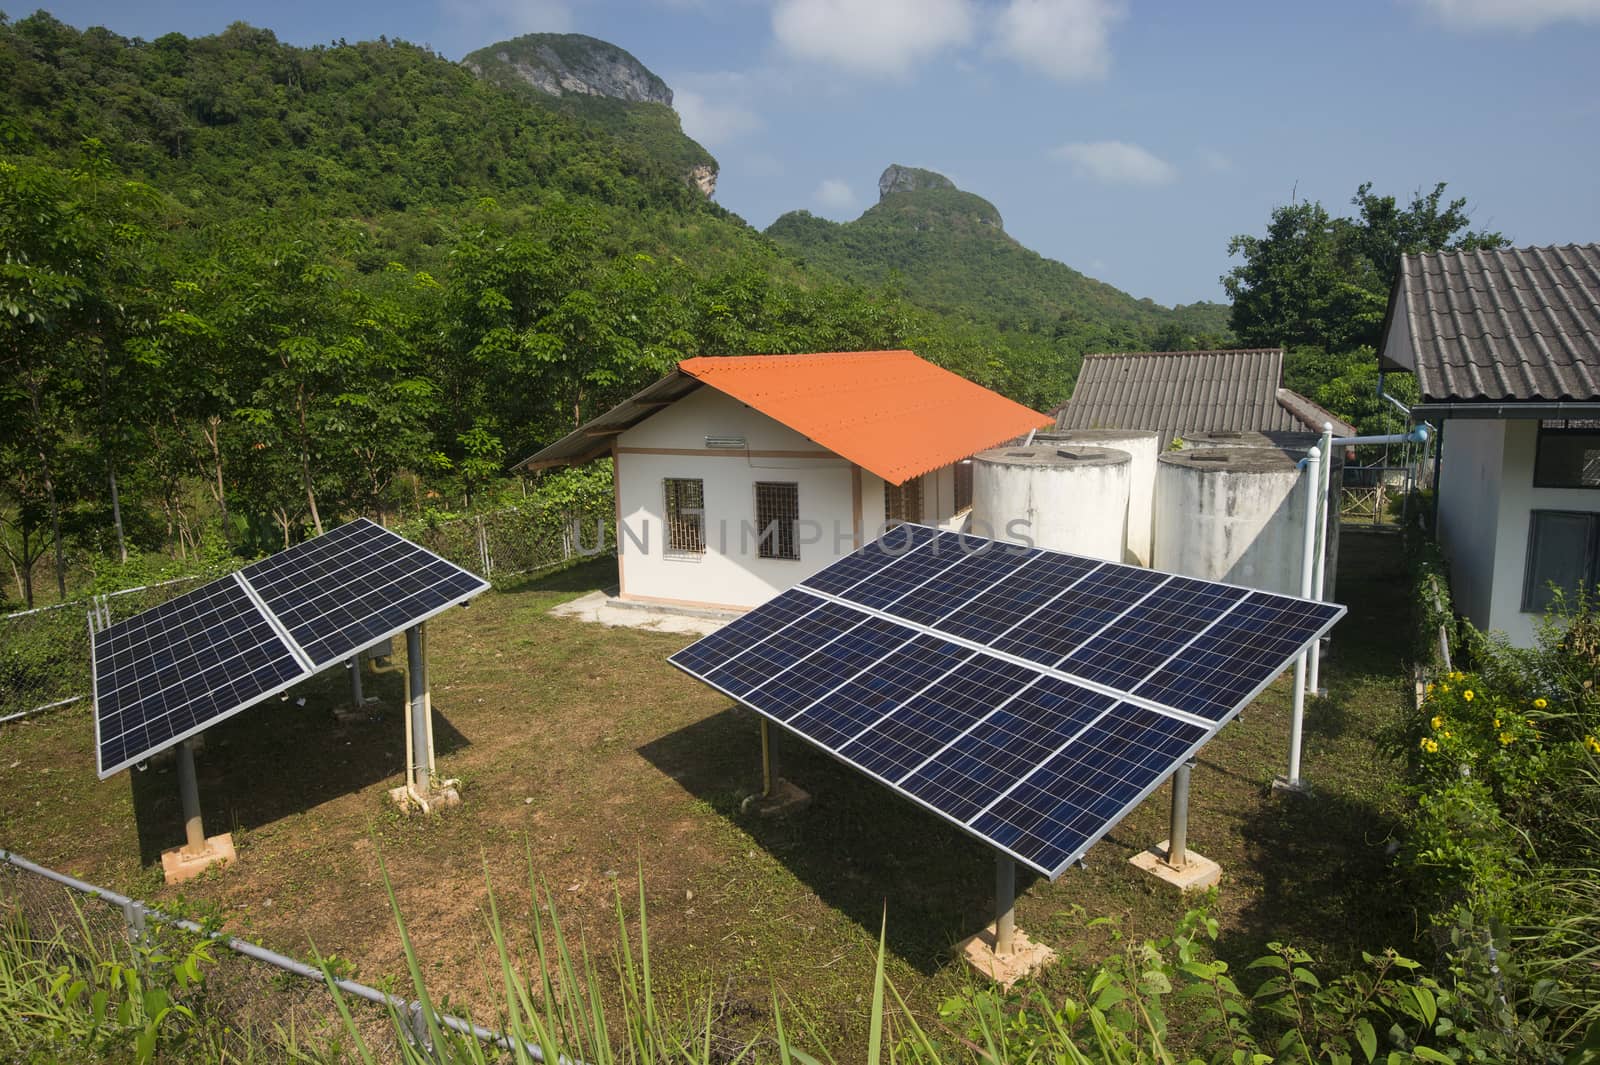 solar panel providing power to a rural area in thailand by think4photop